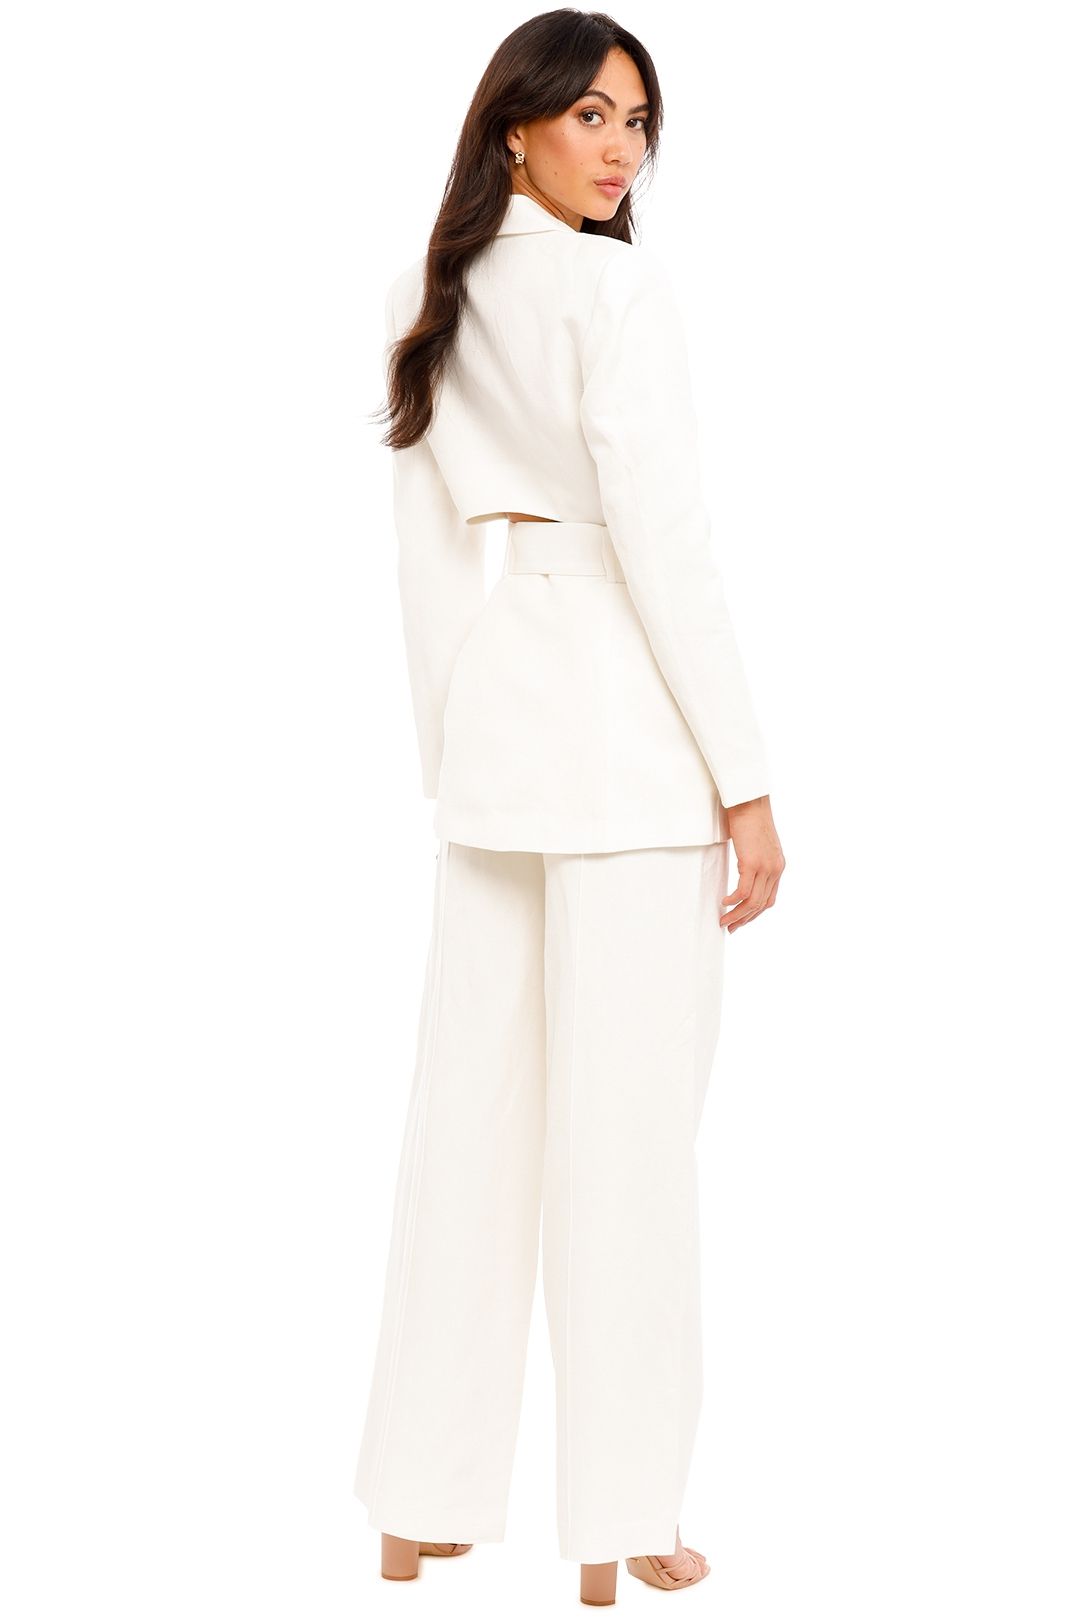 Significant Other Florina Blazer and Pant Set Ivory Belted